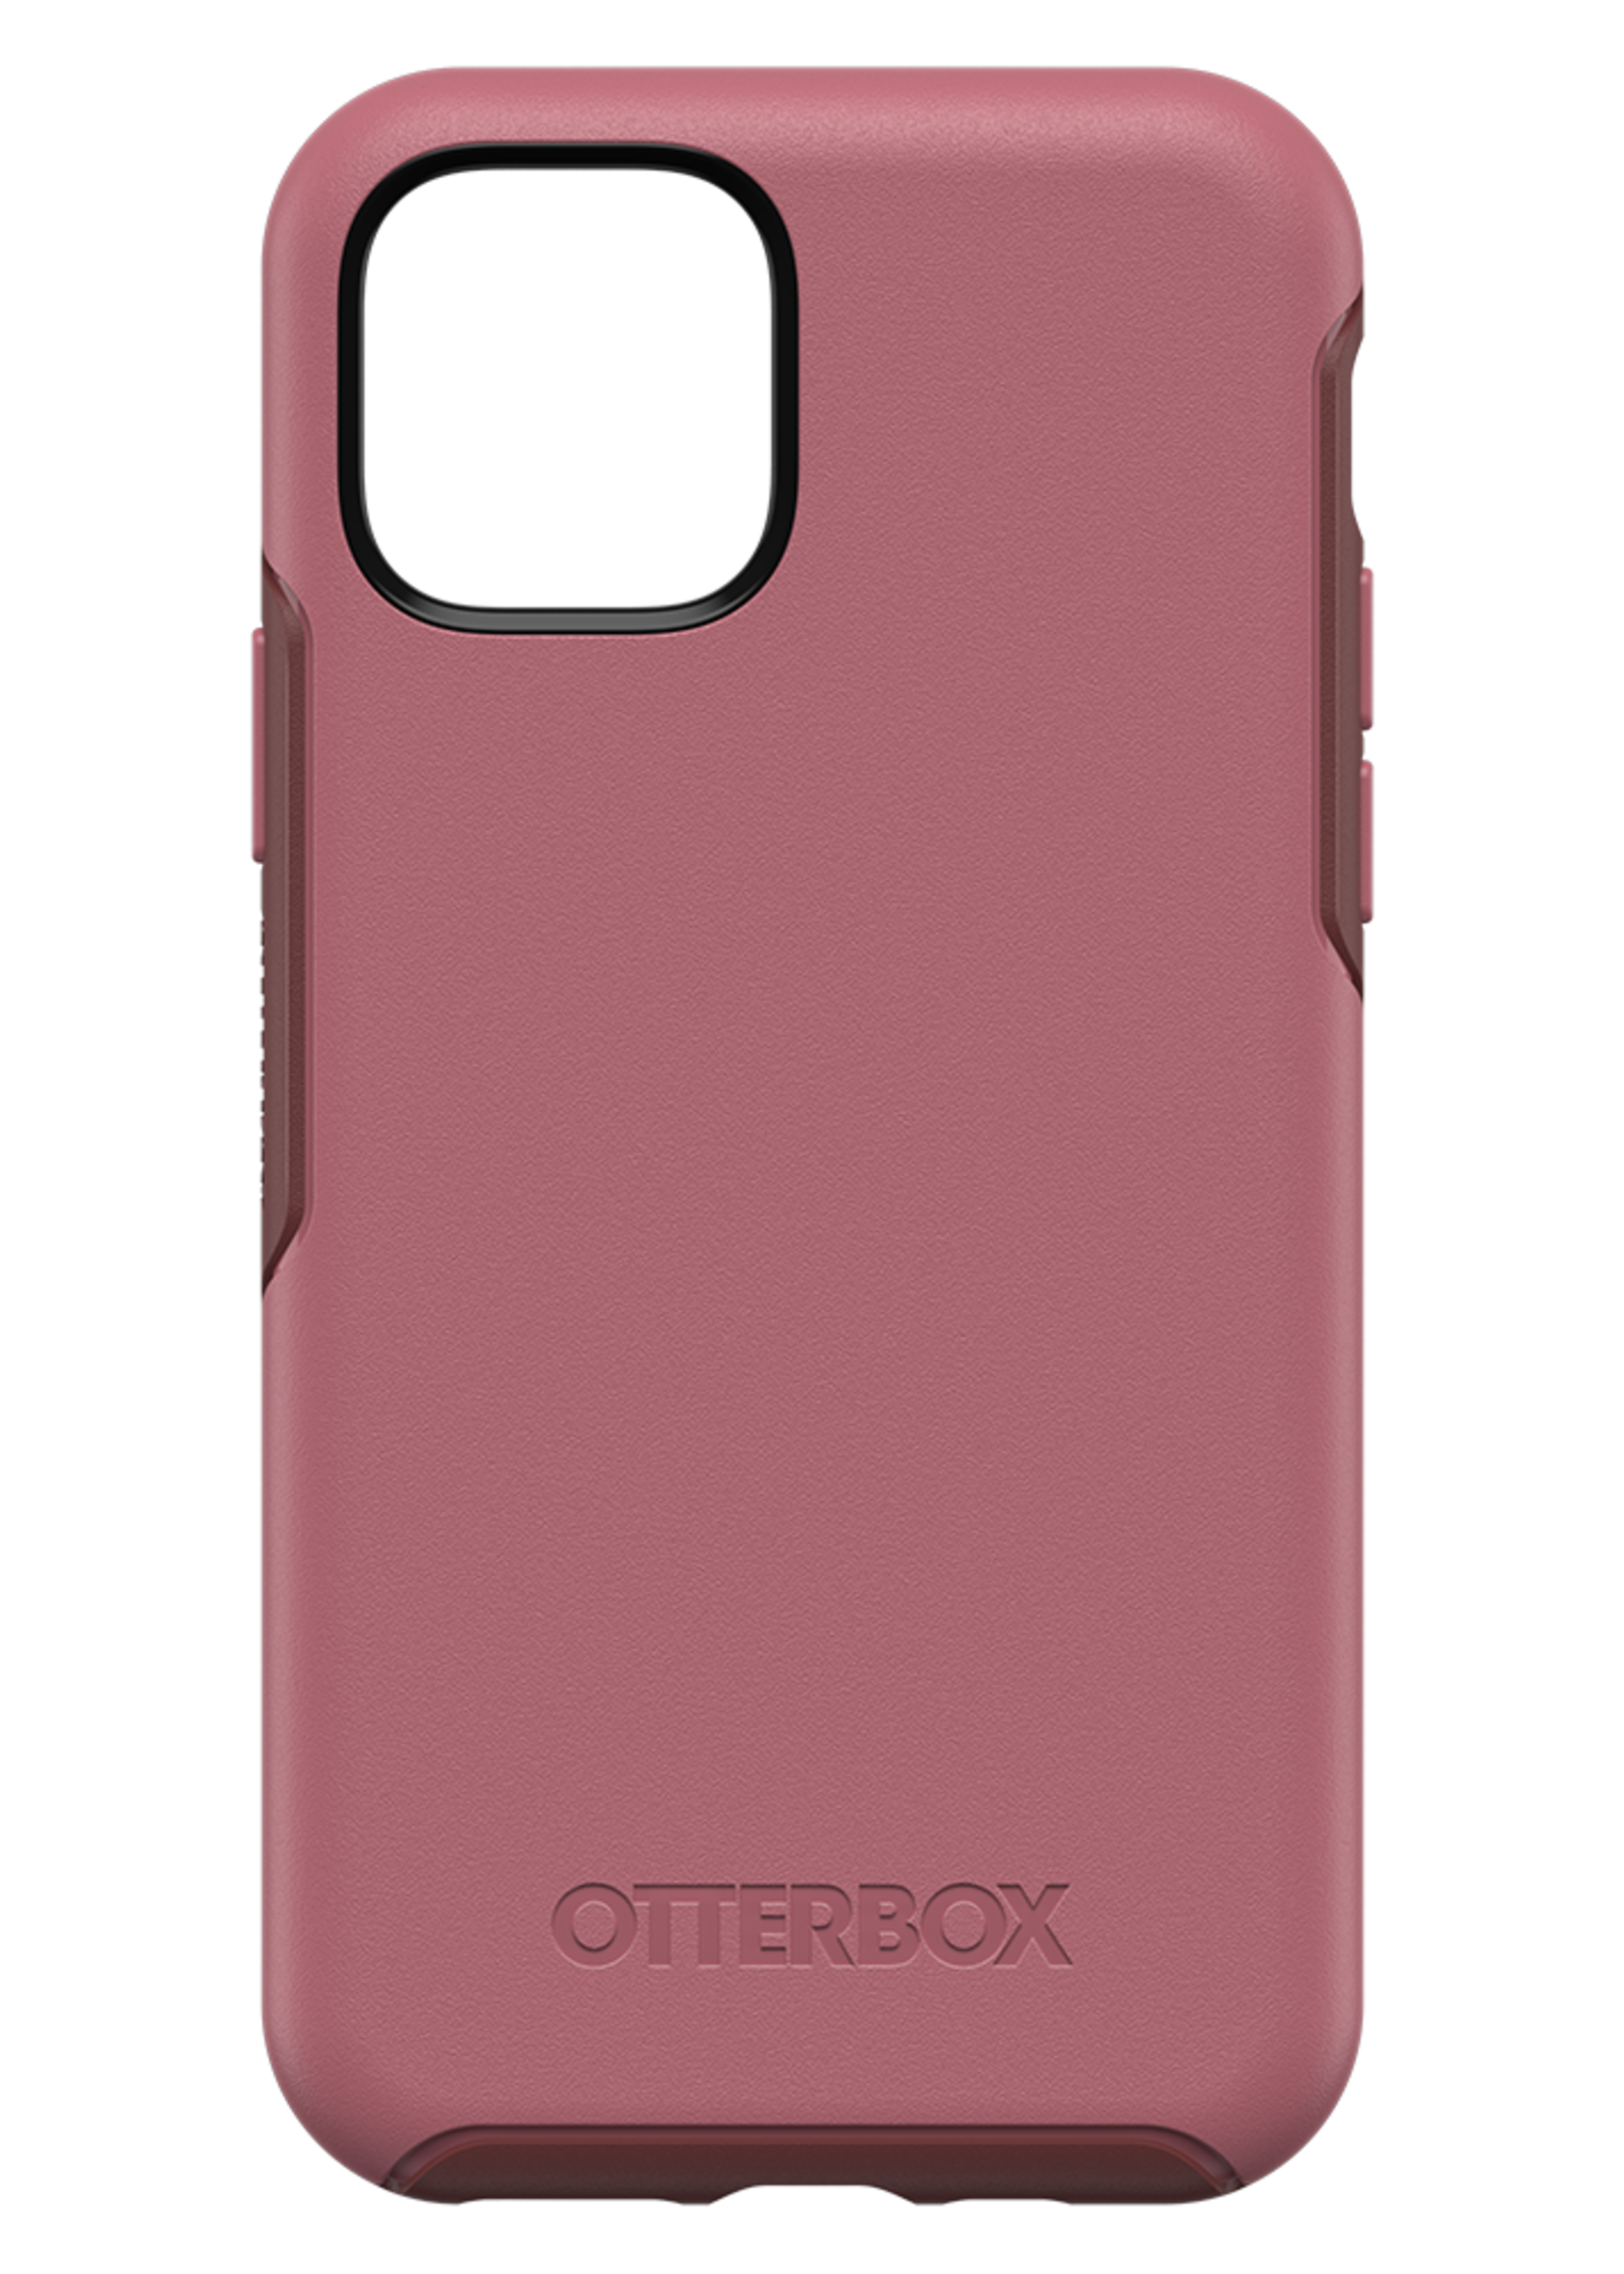 Otterbox OtterBox - Symmetry Case for Apple iPhone 11 Pro - Beguiled Rose